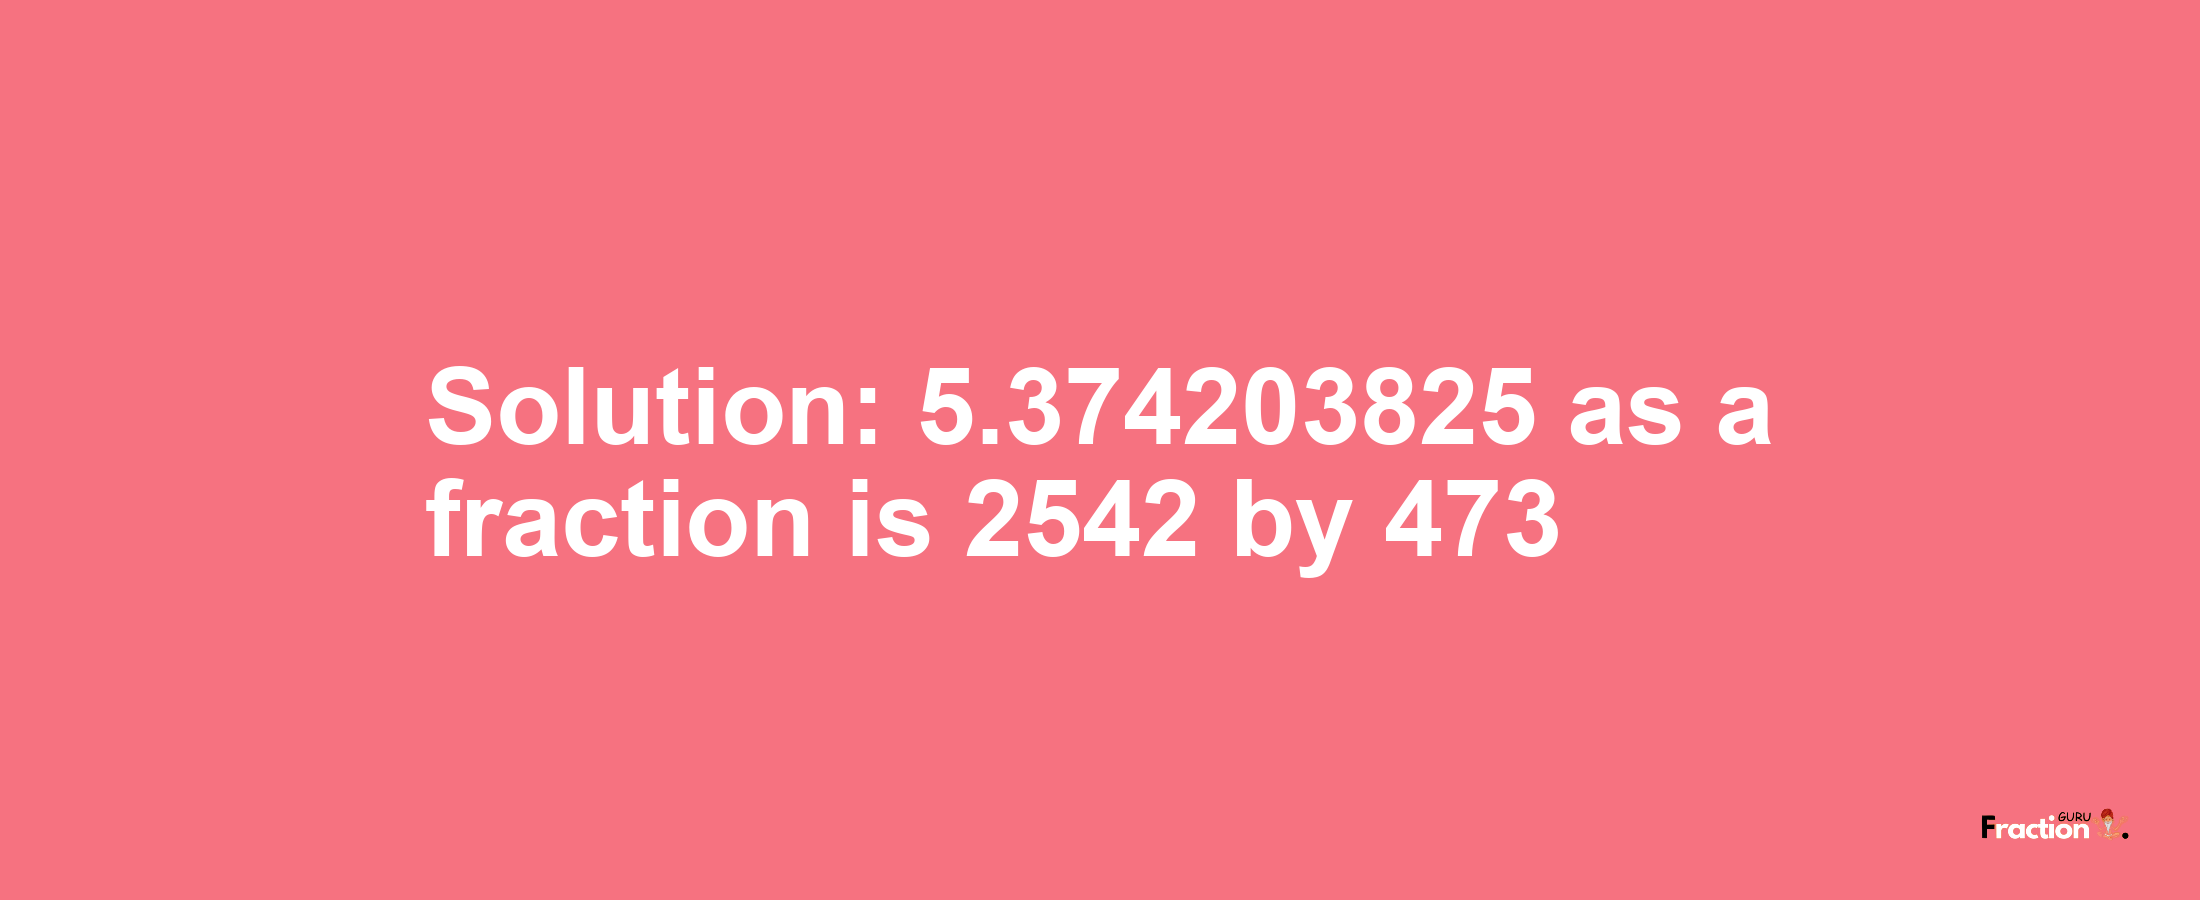 Solution:5.374203825 as a fraction is 2542/473